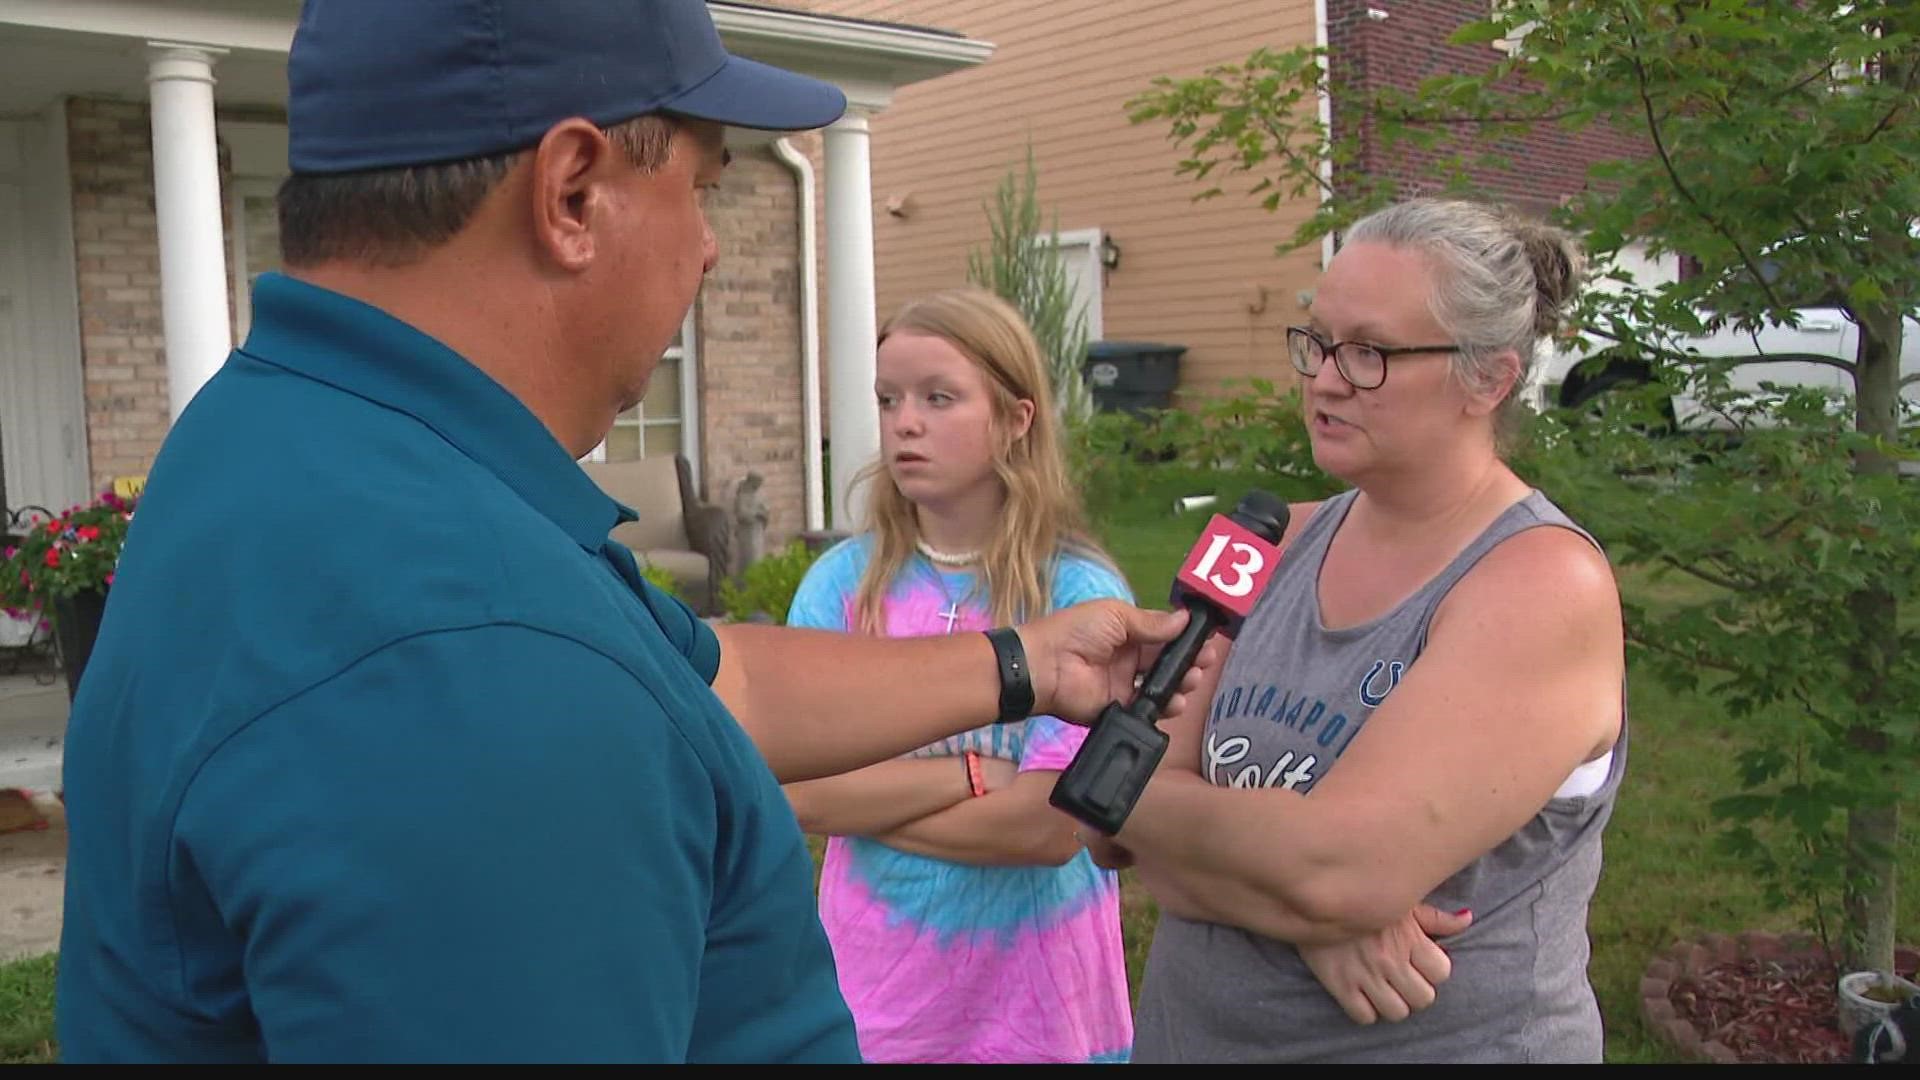 Alison Dick told 13News how she learned her 12-year-old daughter, Bella, had a piece of a bullet lodged in her back next to her spine following Sunday's shooting.